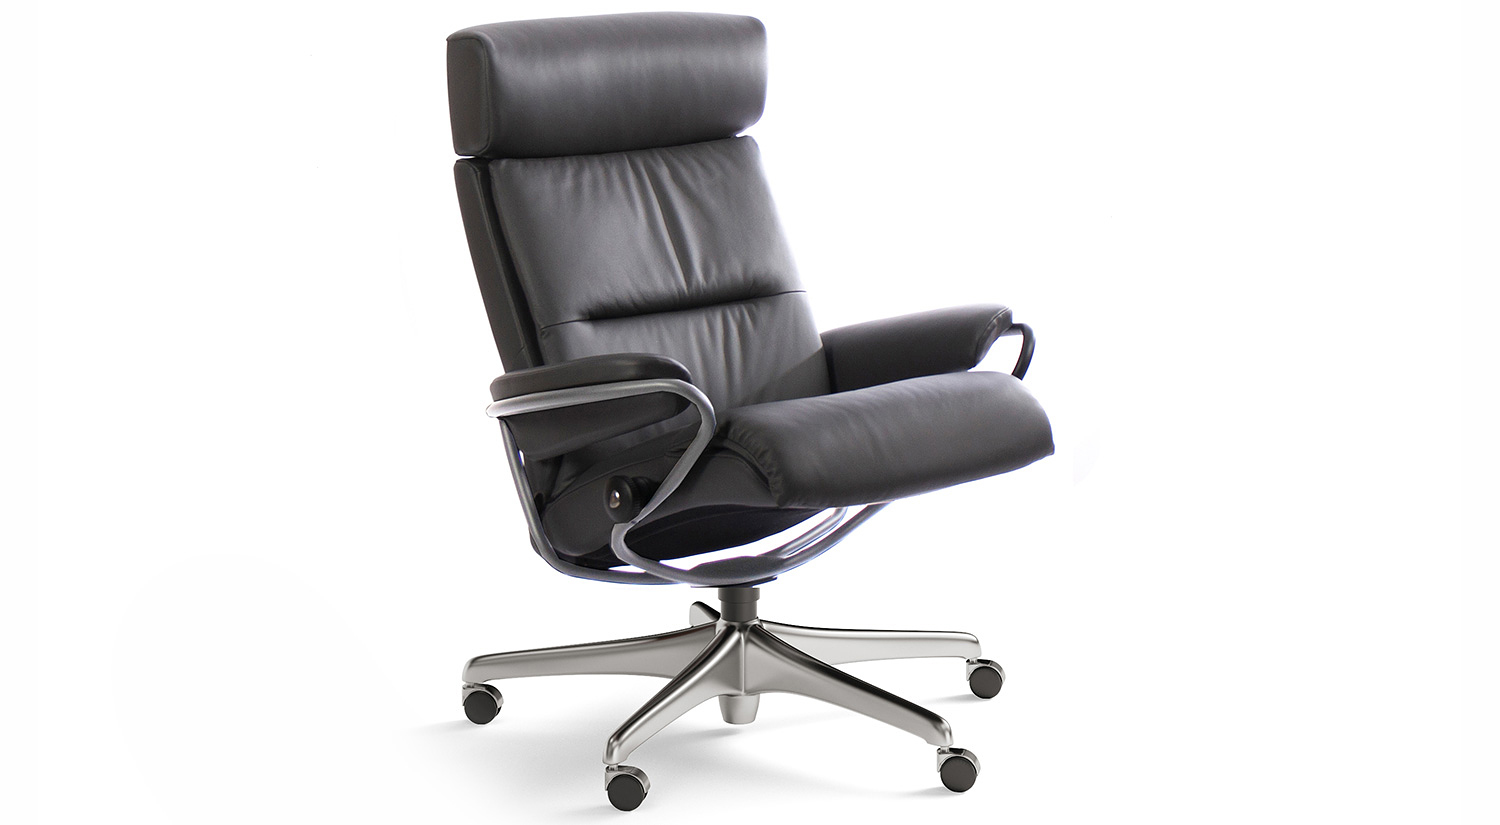 Circle Furniture Tokyo Low Back Stressless Office Chair Tokyo